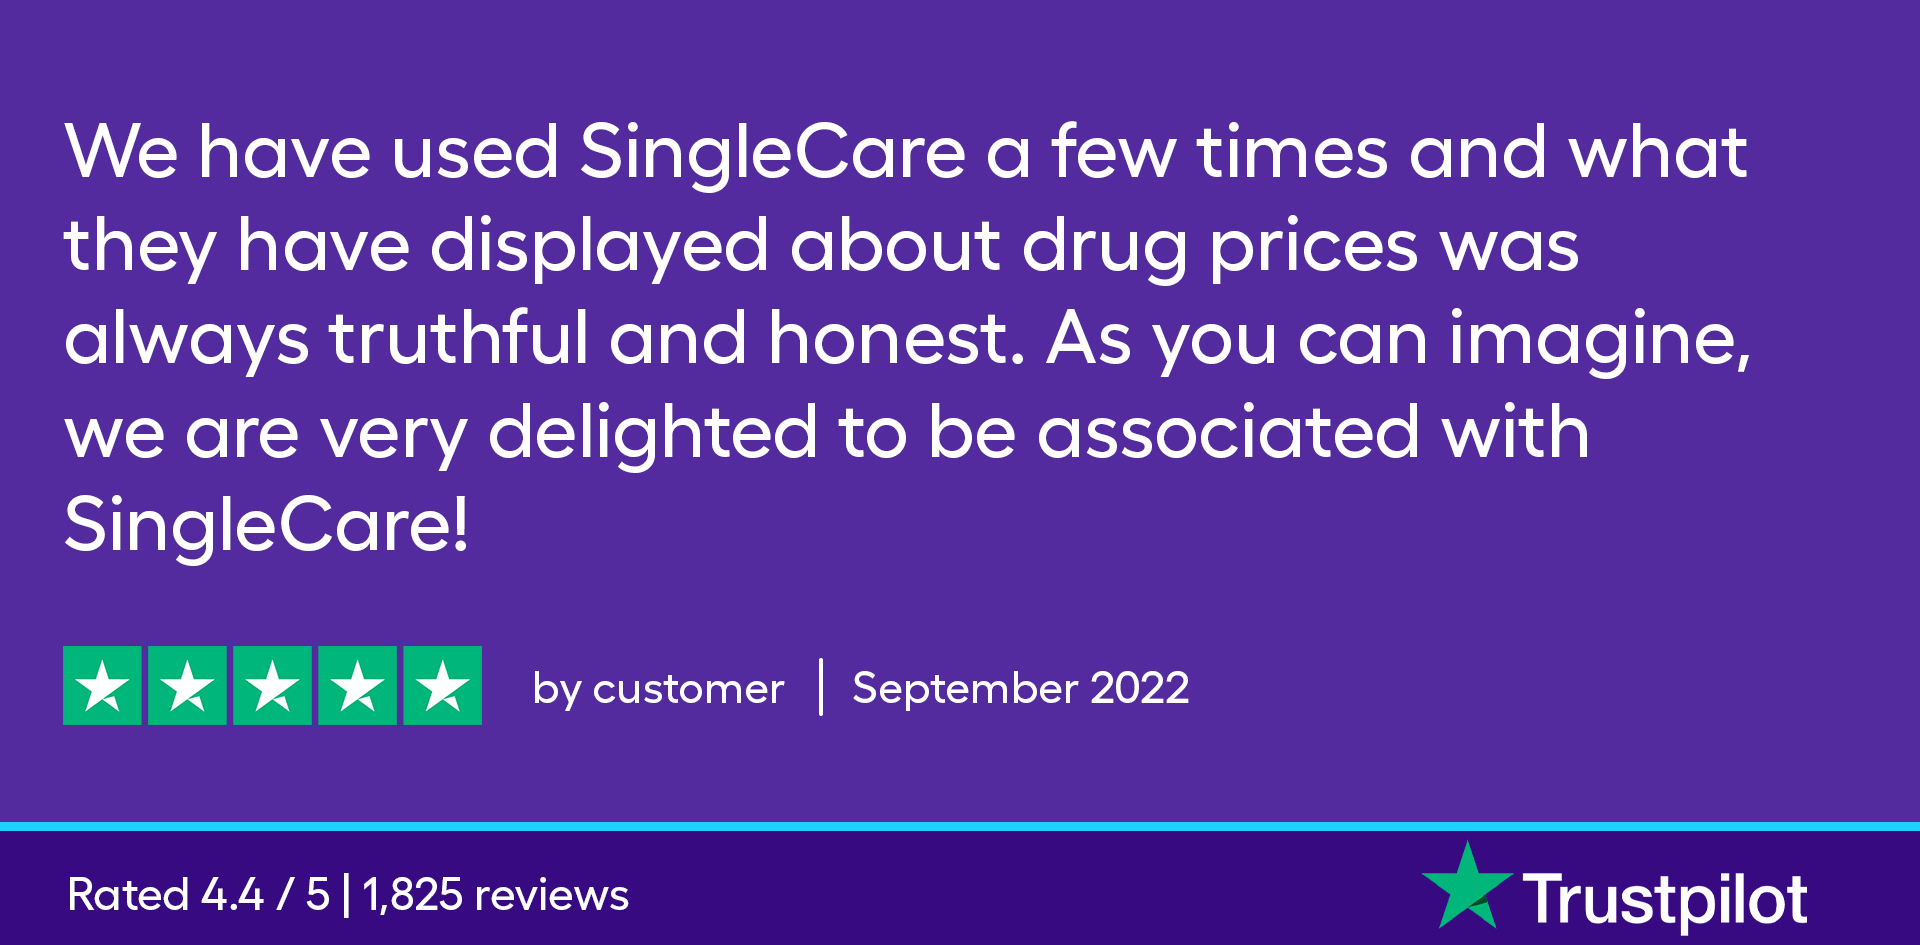 We have used SingleCare a few times and what they have displayed about drug prices was always truthful and honest. As you can imagine, we are very delighted to be associated with SingleCare!